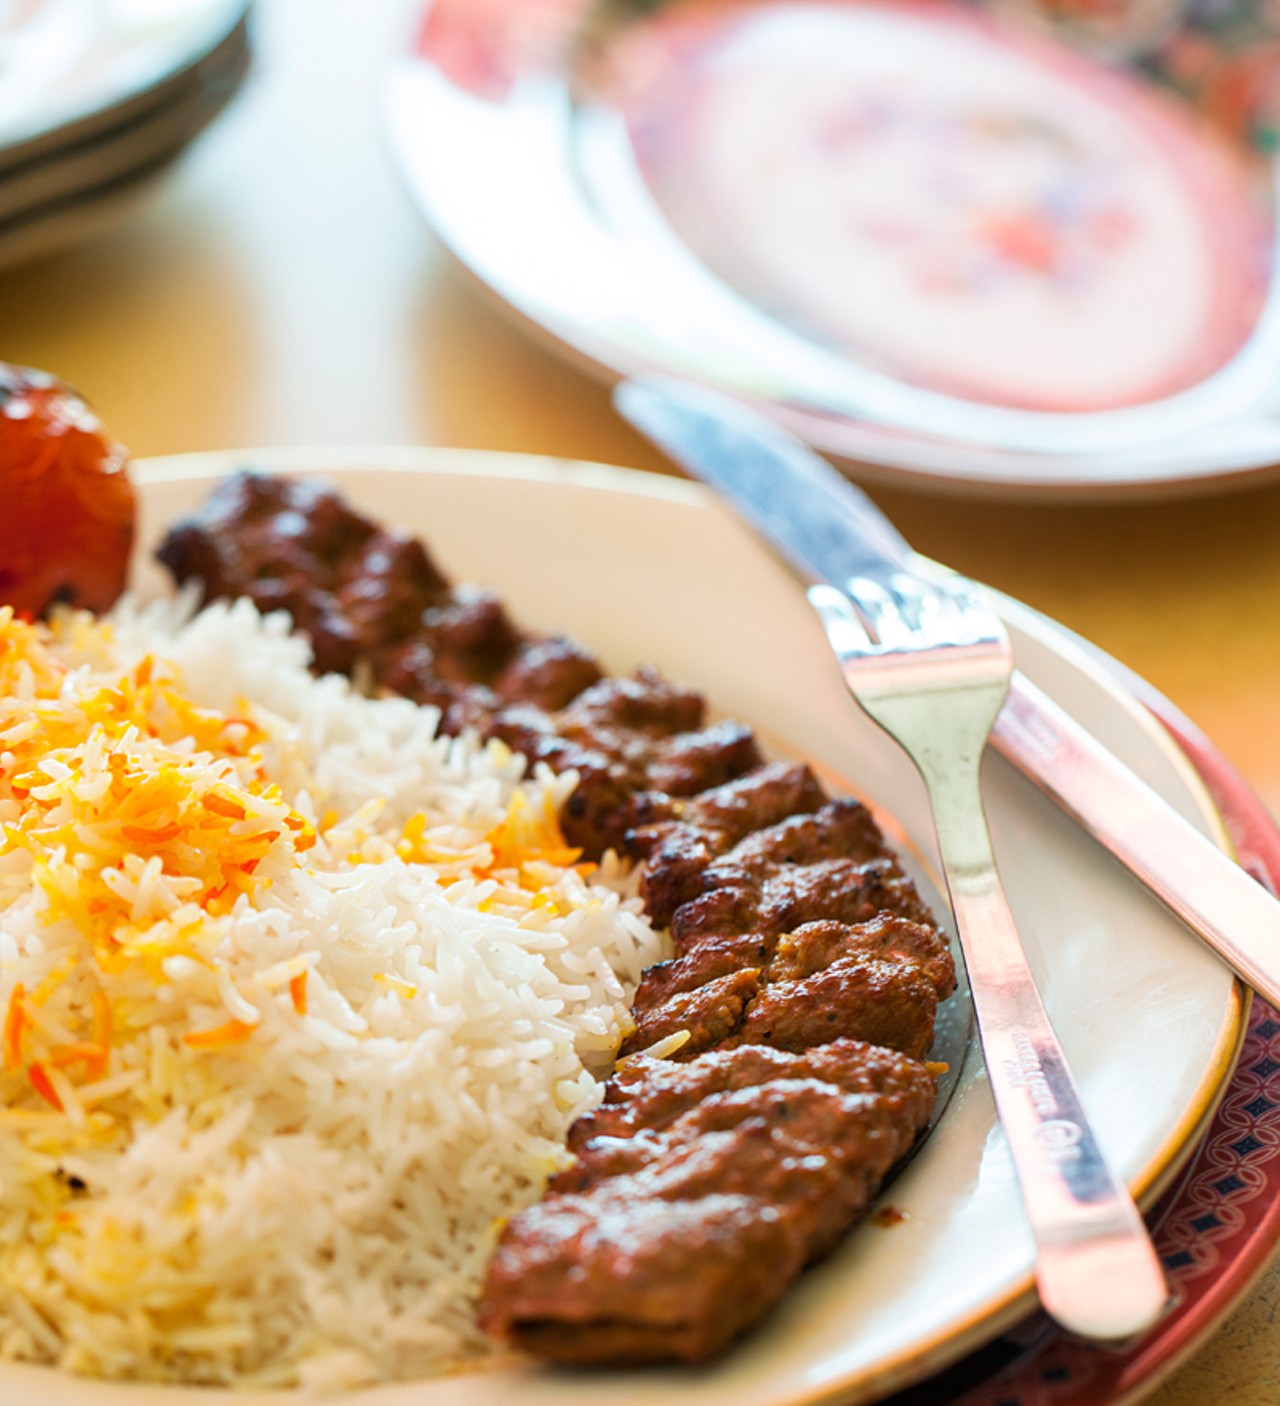 "Beef Kobeedah" is served with basmati rice and grilled Roma tomatoes.